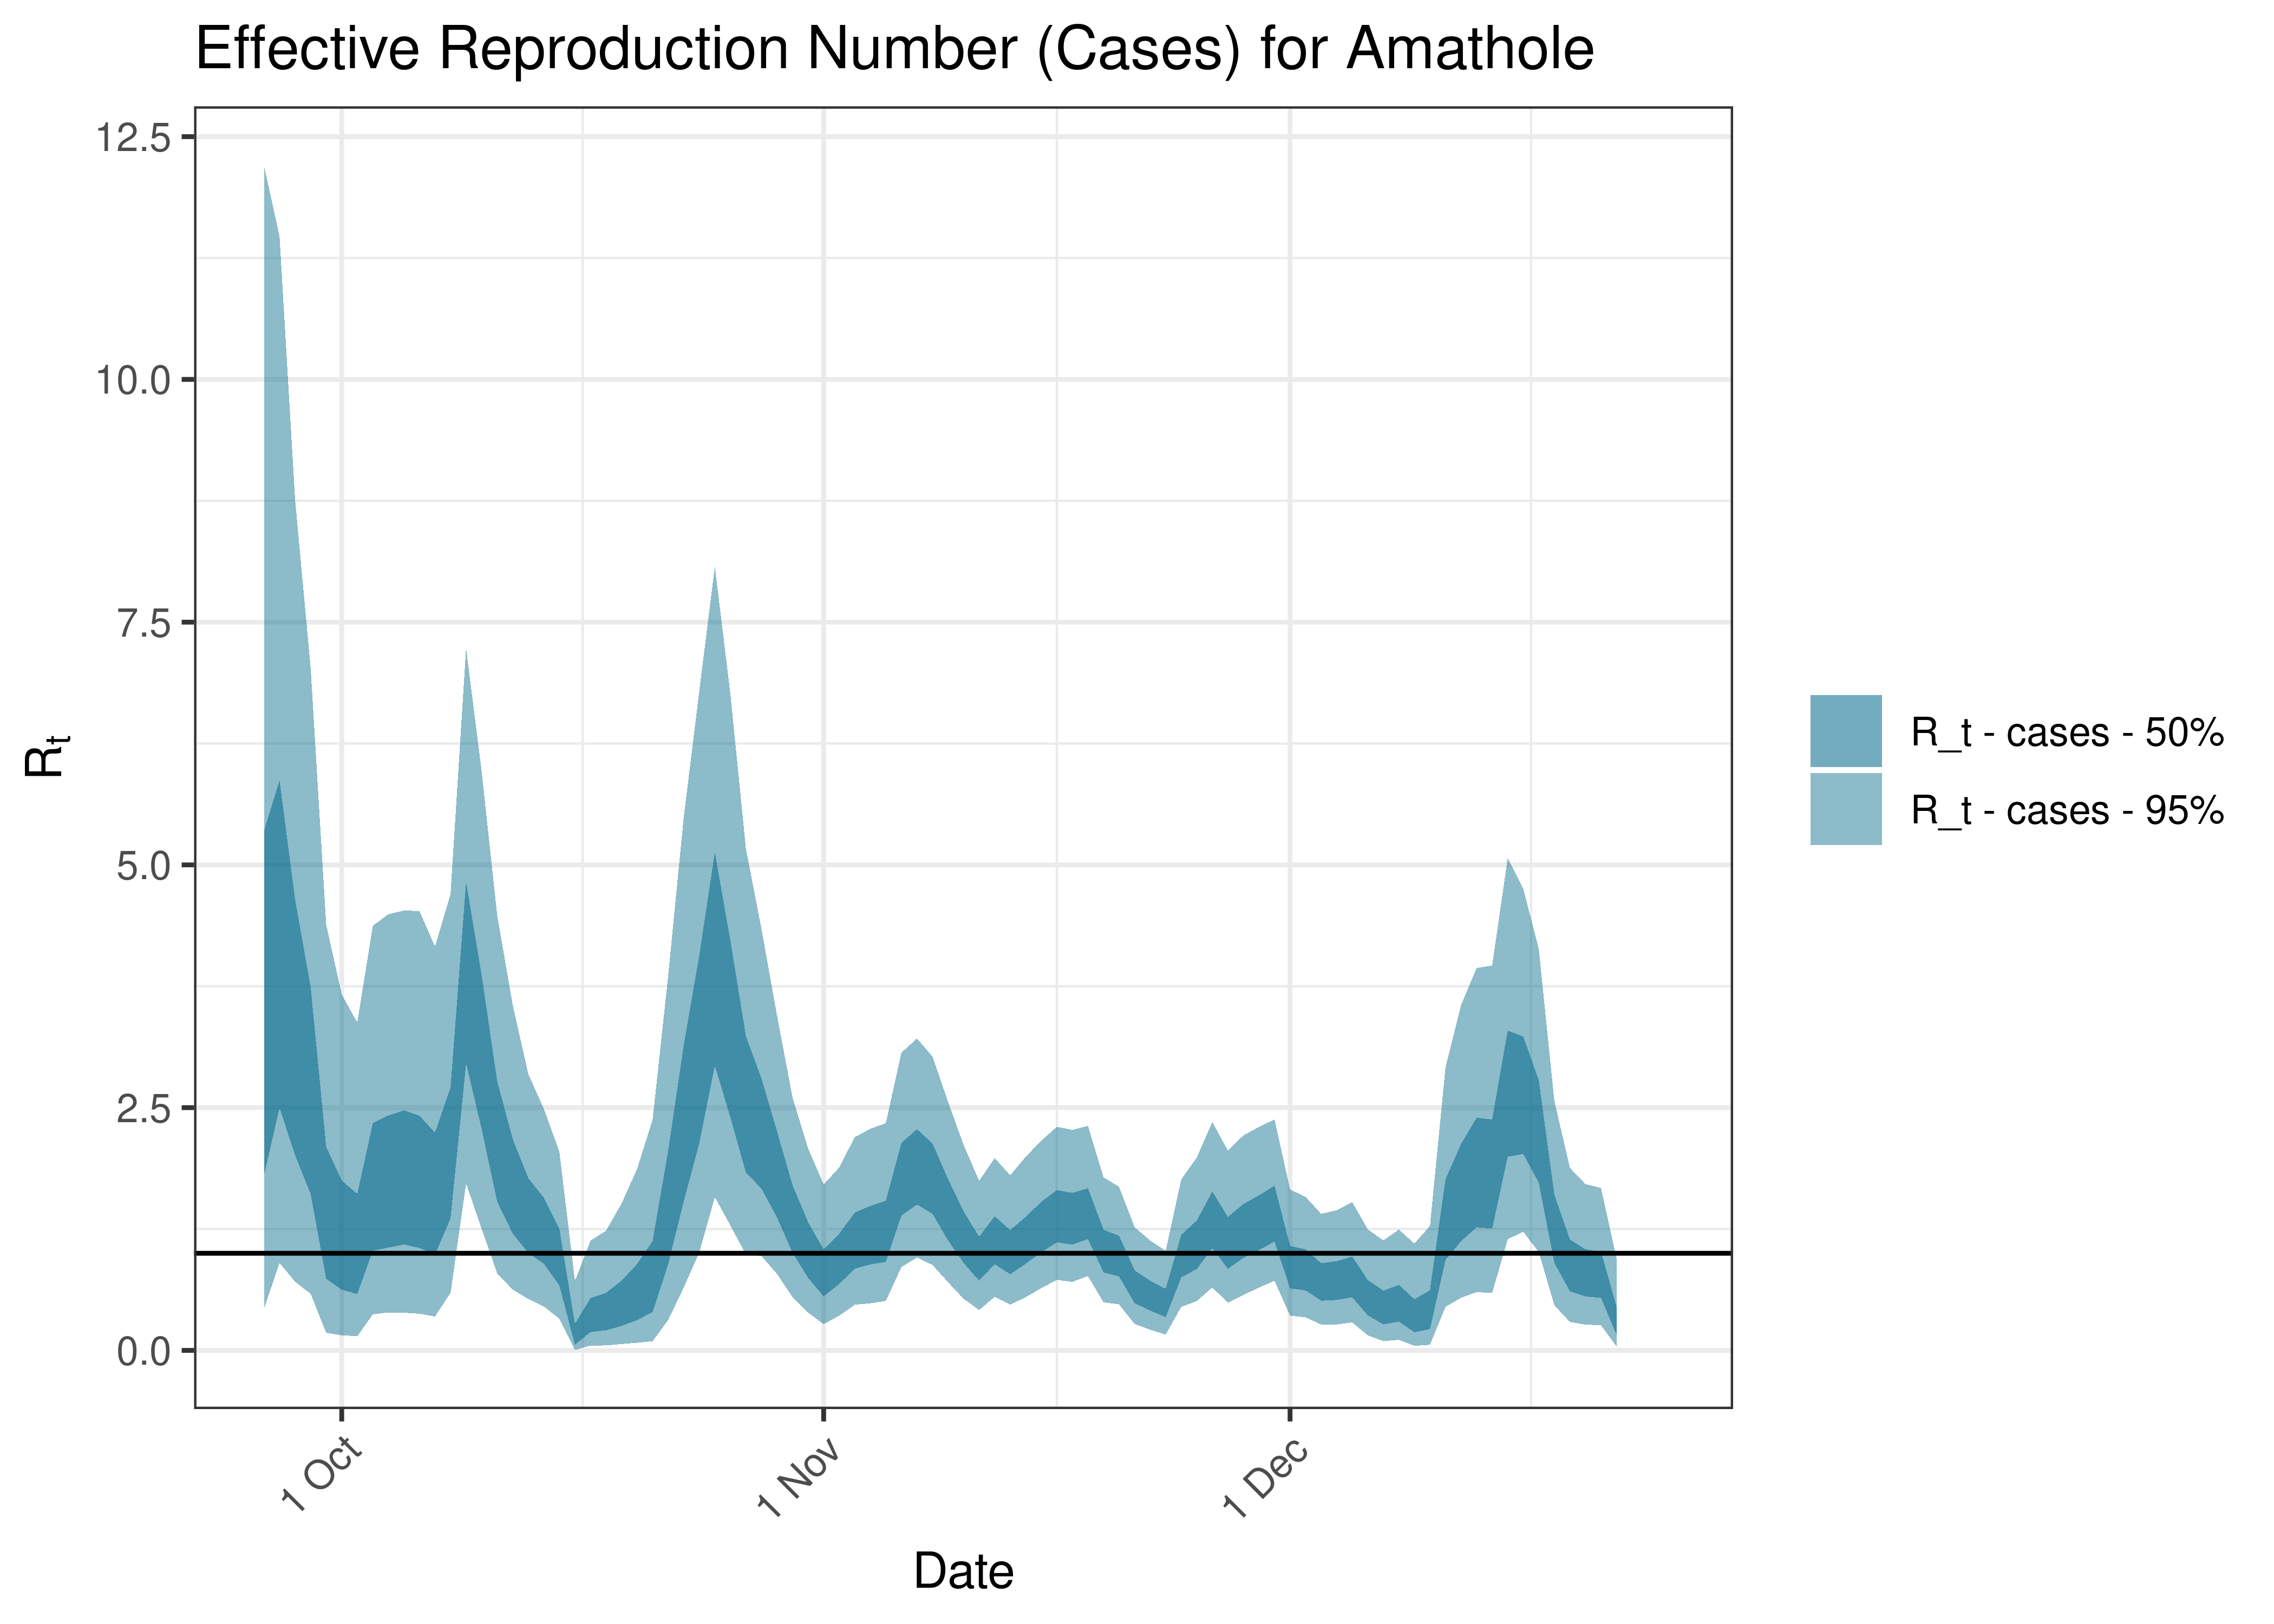 Estimated Effective Reproduction Number Based on Cases for Amathole over last 90 days